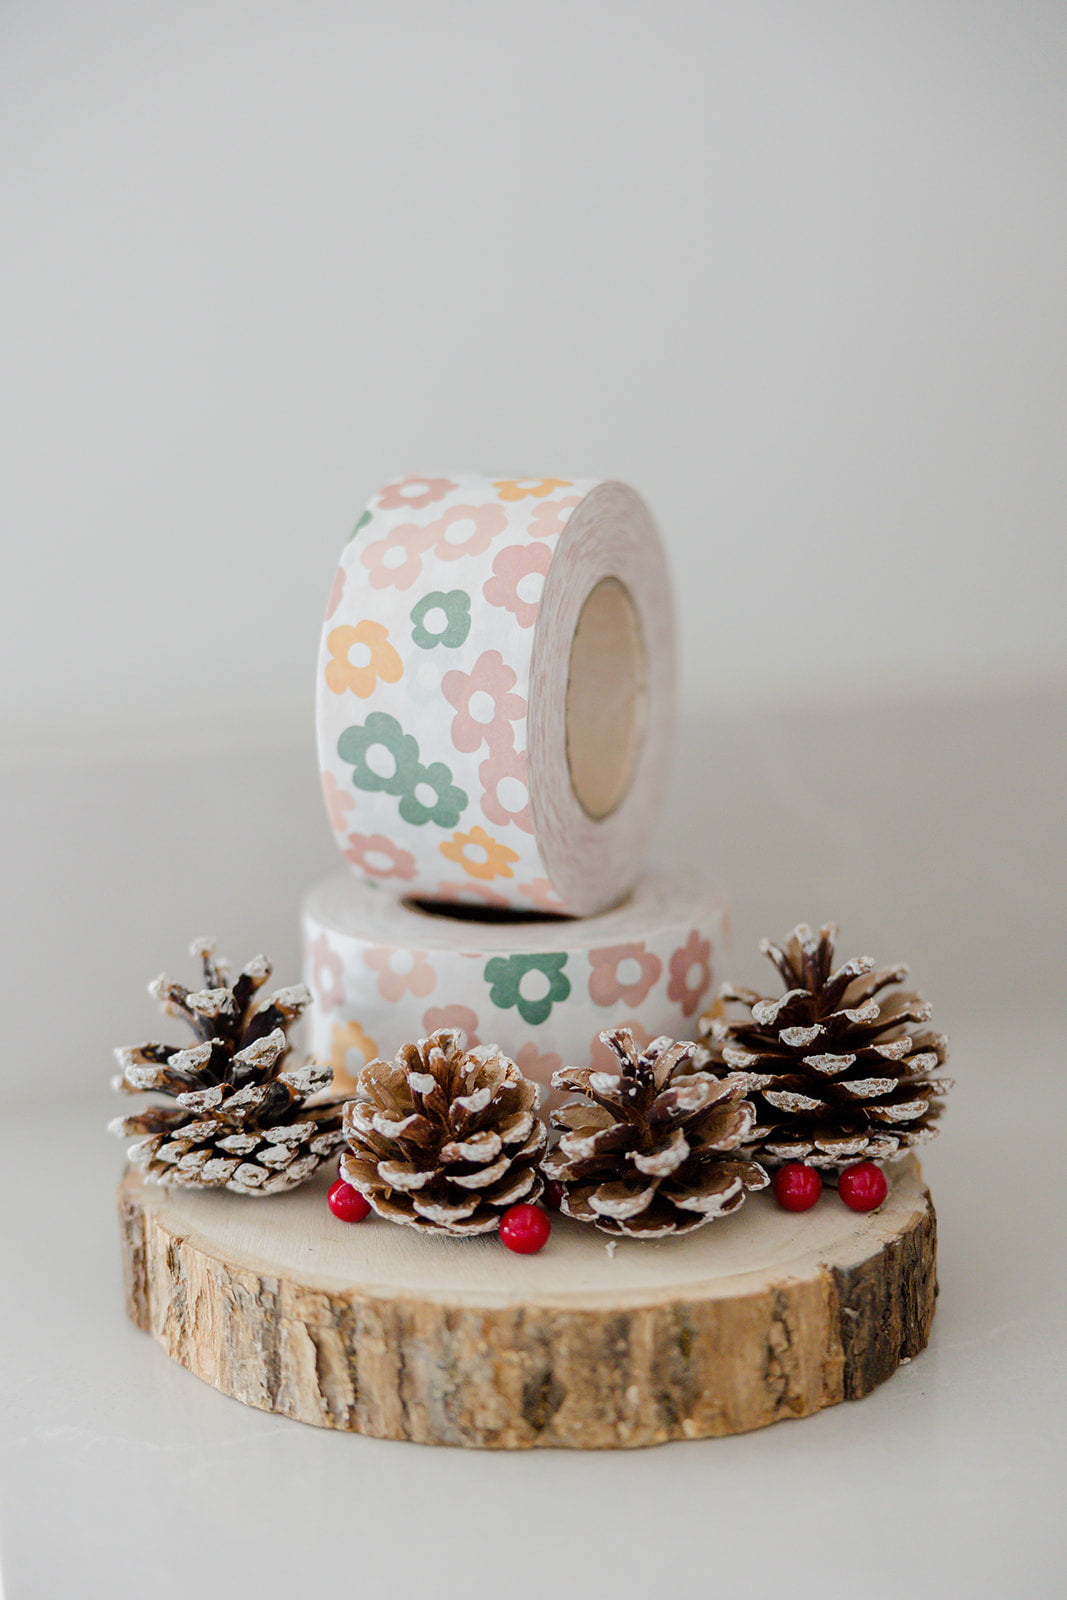 A roll of Daisy Multi packing tape with pine cones on top.